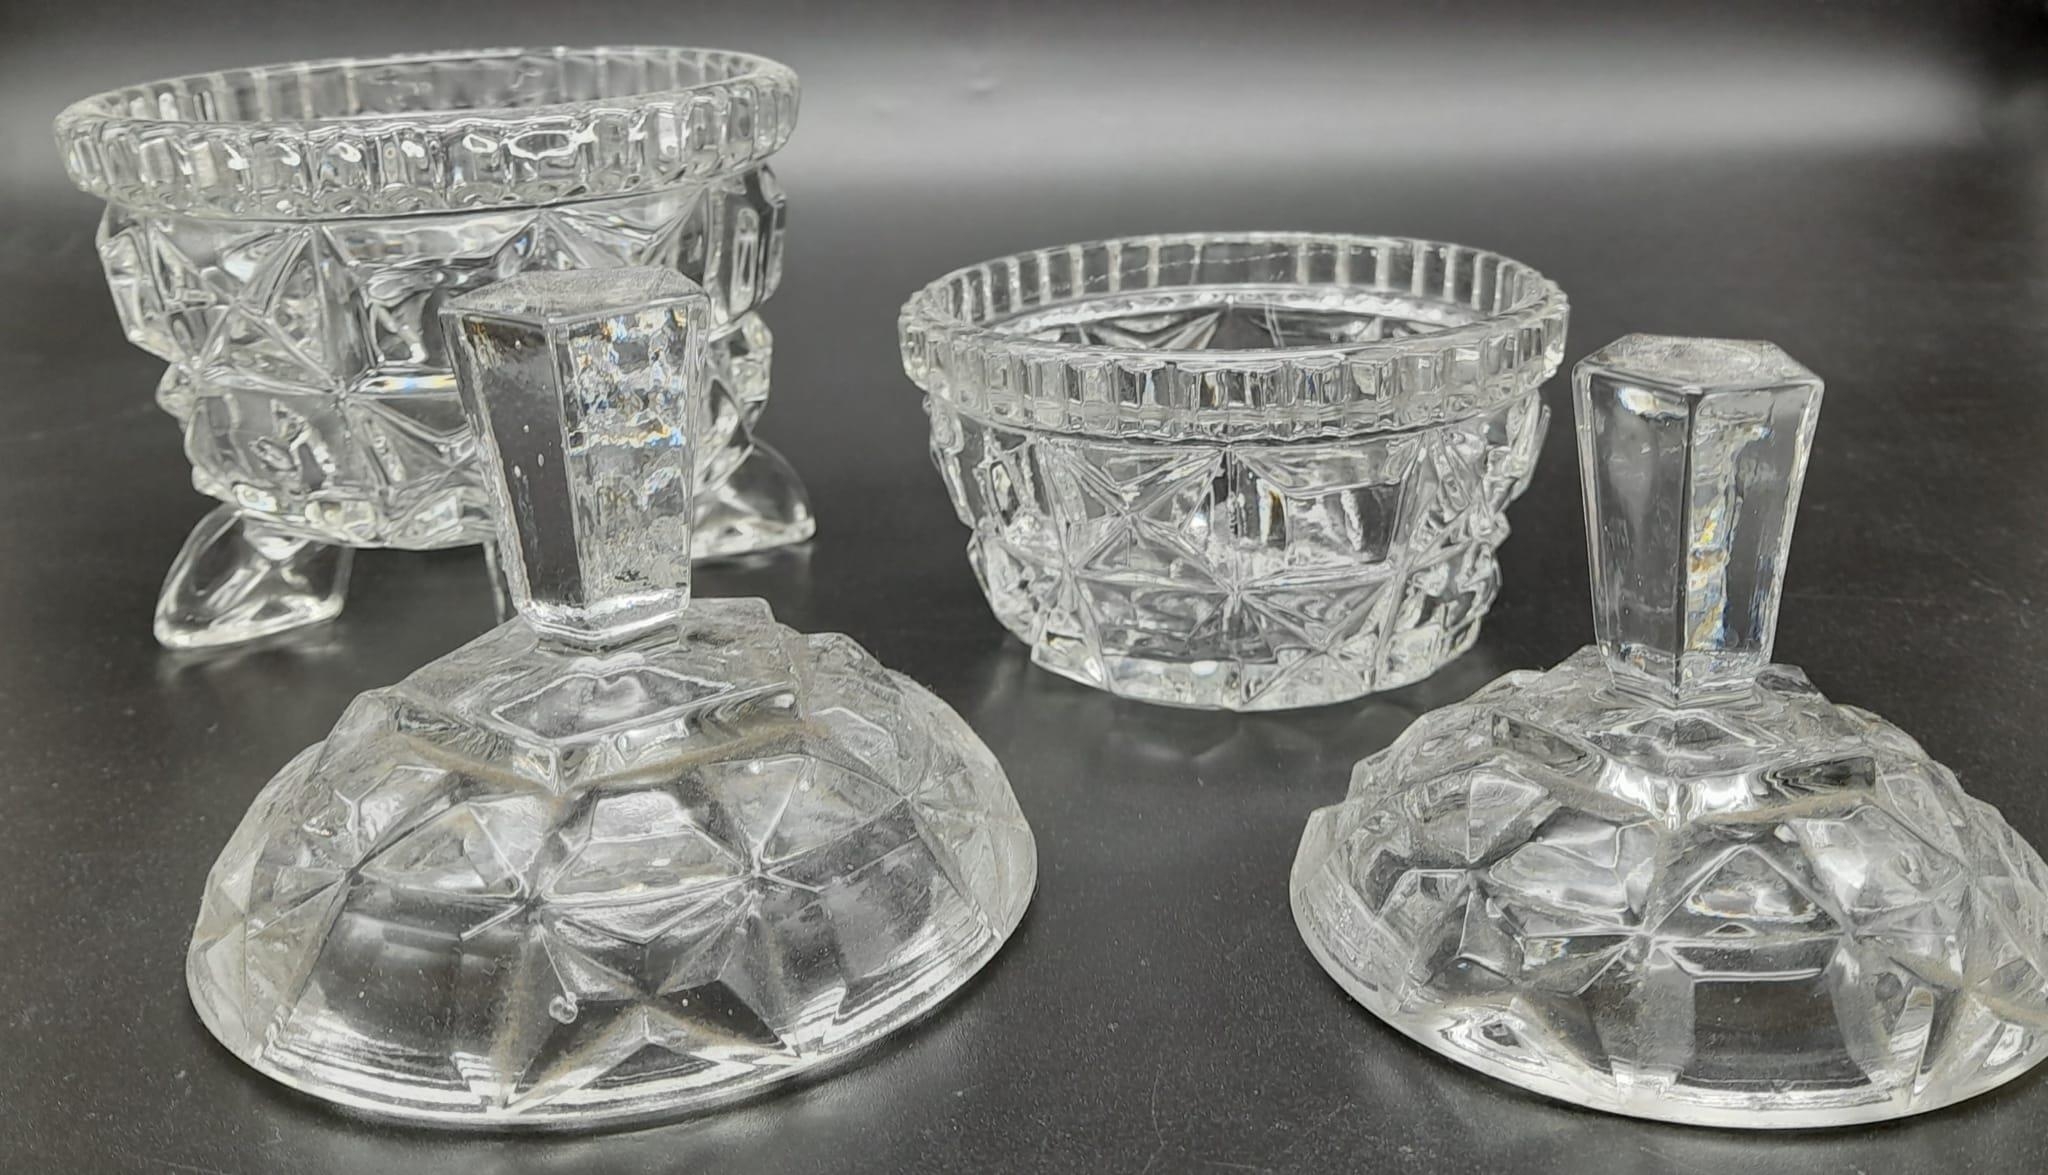 Cut glass serving tray with bon bon and sugar dishes. Tray measures 31x21cm, larger dish stands 15cm - Image 4 of 4